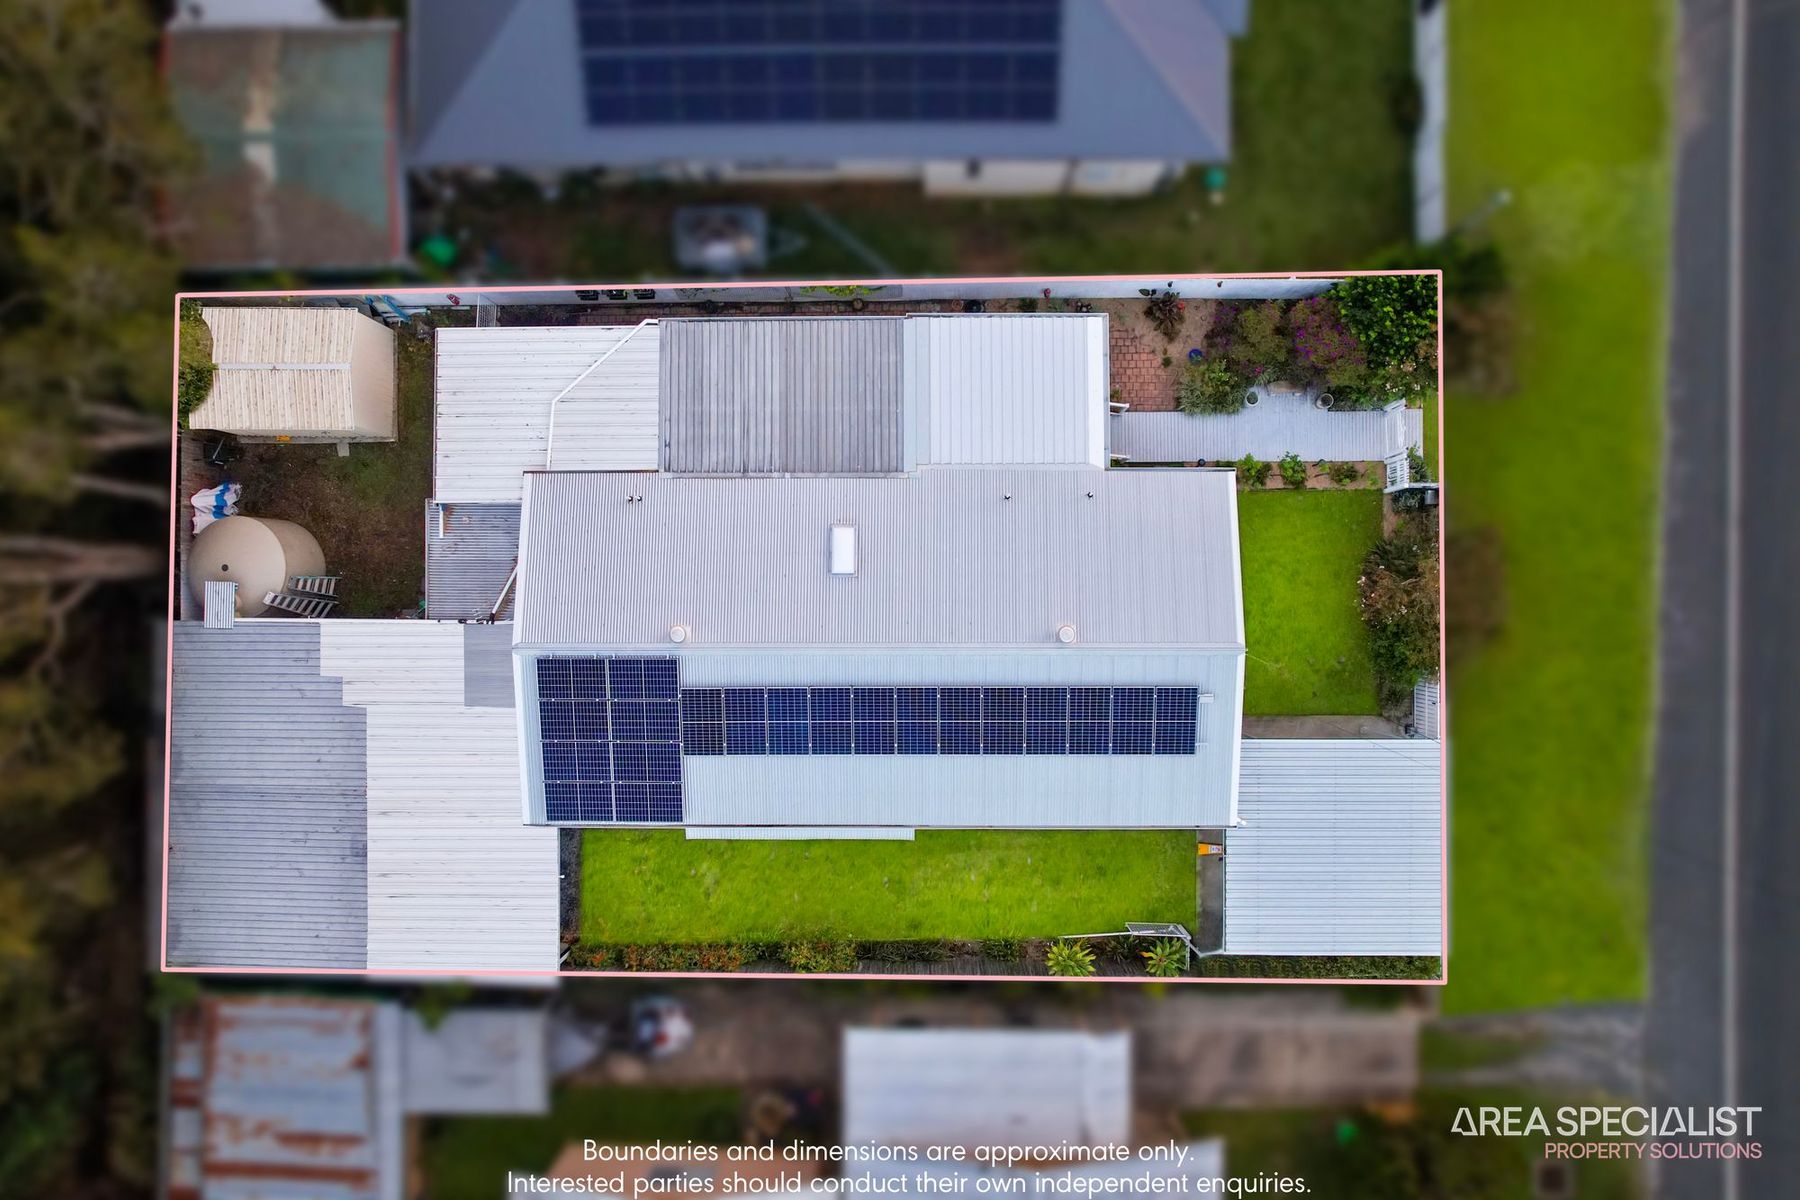 1110 Pimpama Jacobs Well Rd, Jacobs Well QLD 4208 Drone